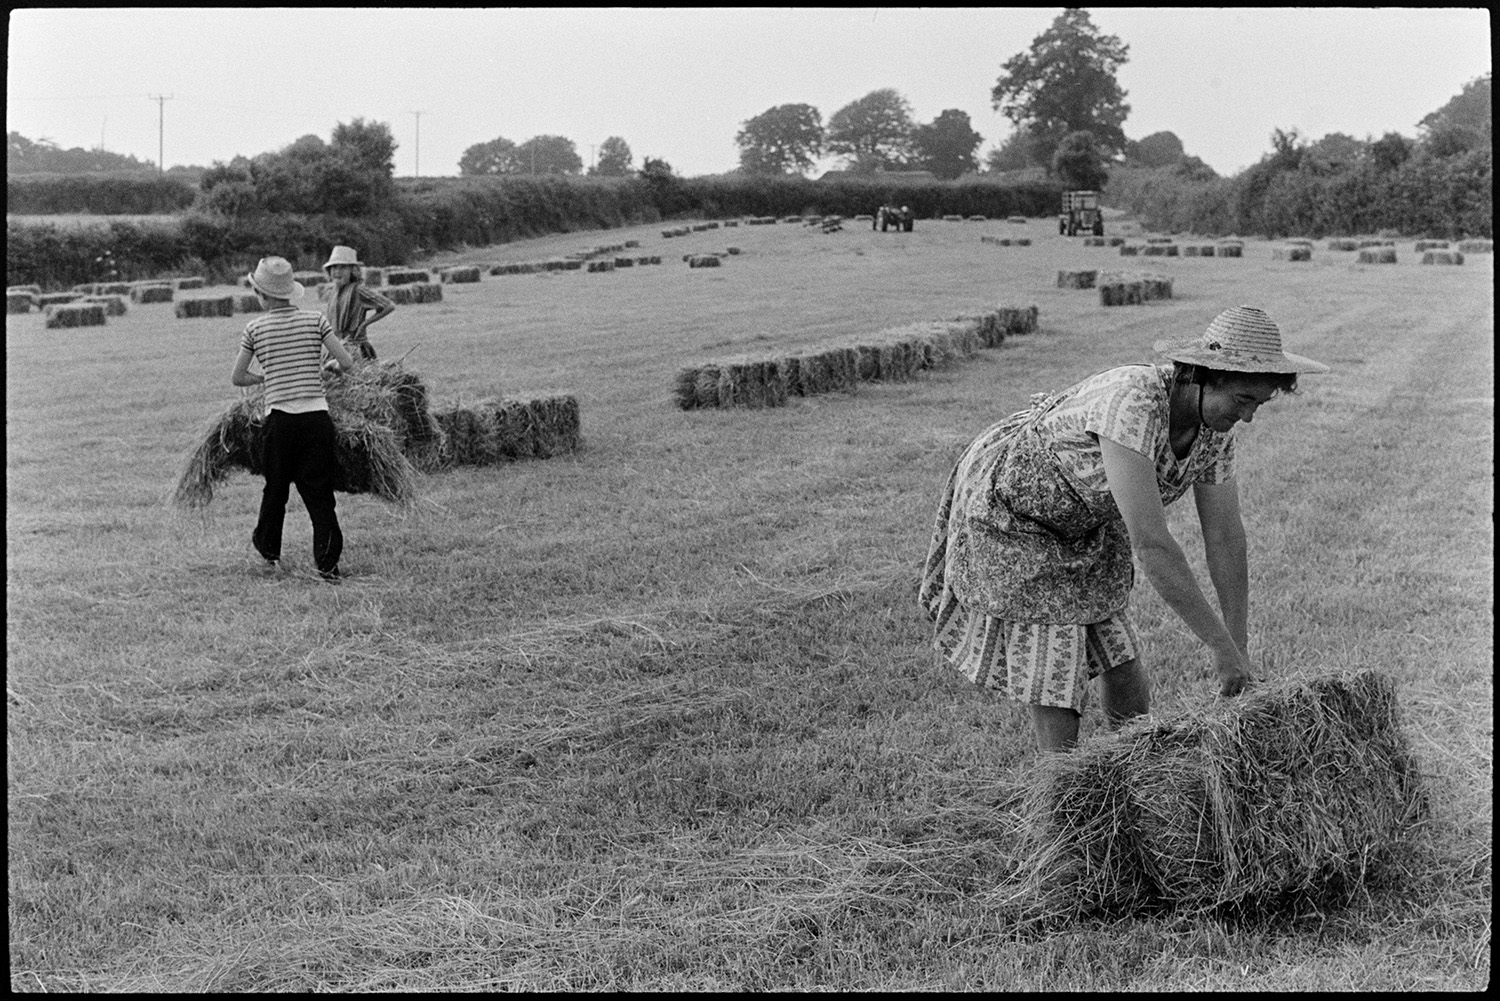 Woman, twin children haymaking. 
[Mrs Oke and her twin children moving hay bales in a field at Deckport, Hatherleigh. A tractor and trailer can be seen further down the field. Mrs Oke is wearing a dress and straw hat.]